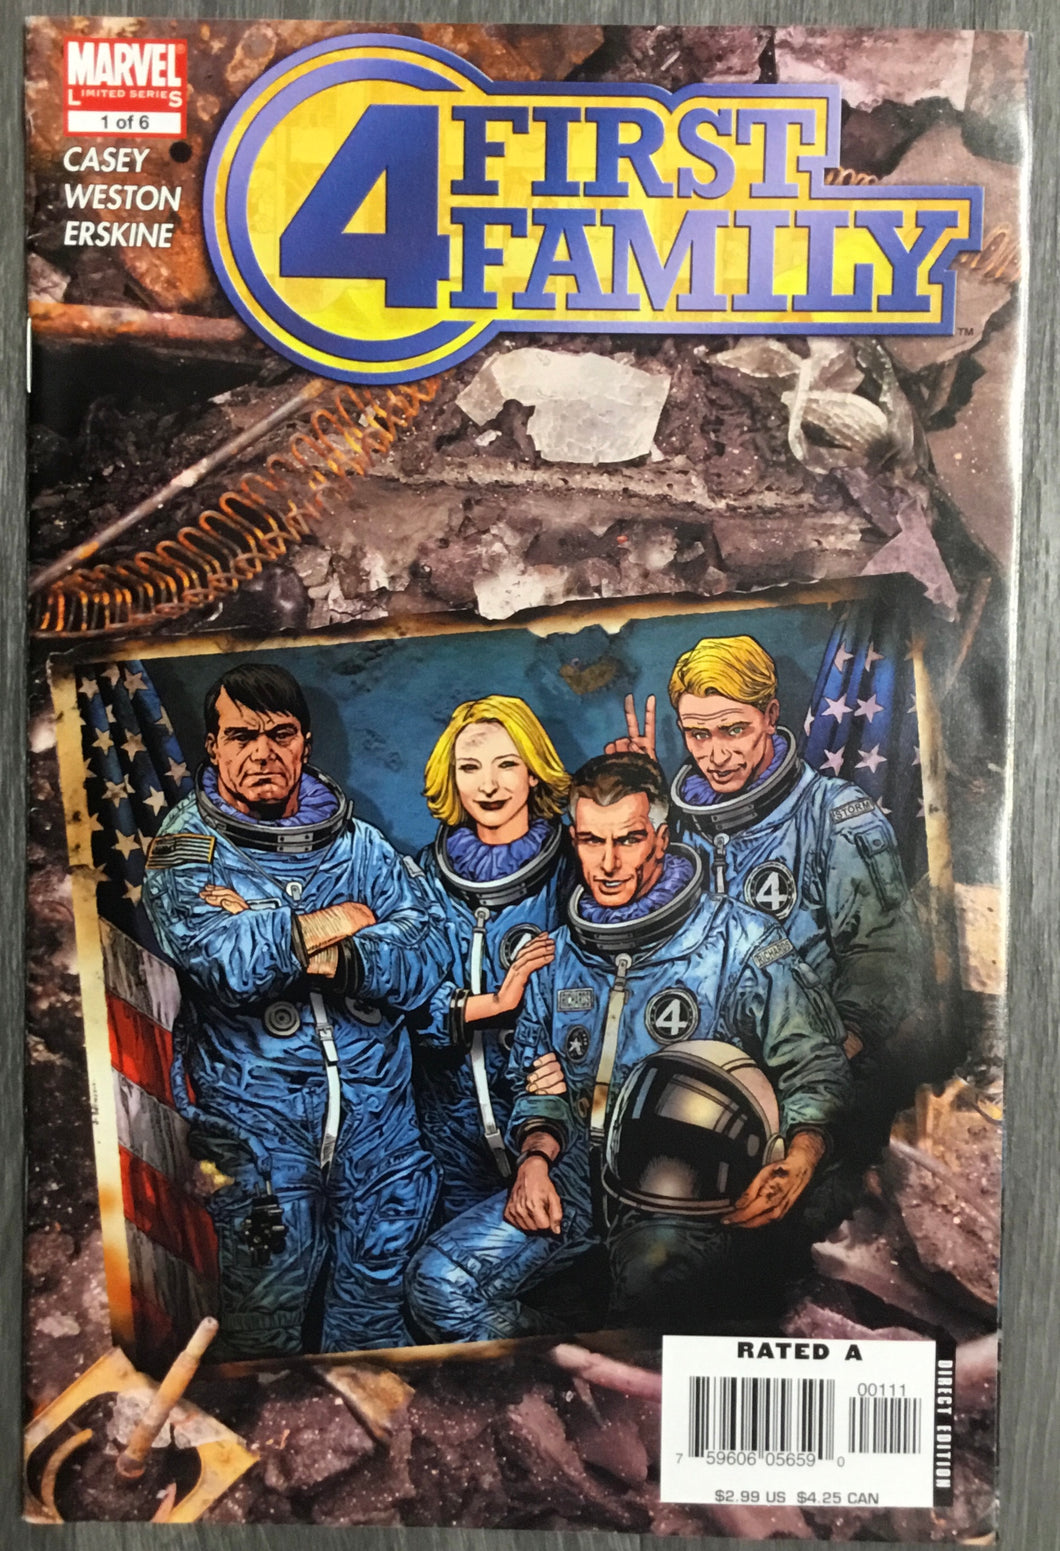 Fantastic Four: First Family No. #1 2006 Marvel Comics